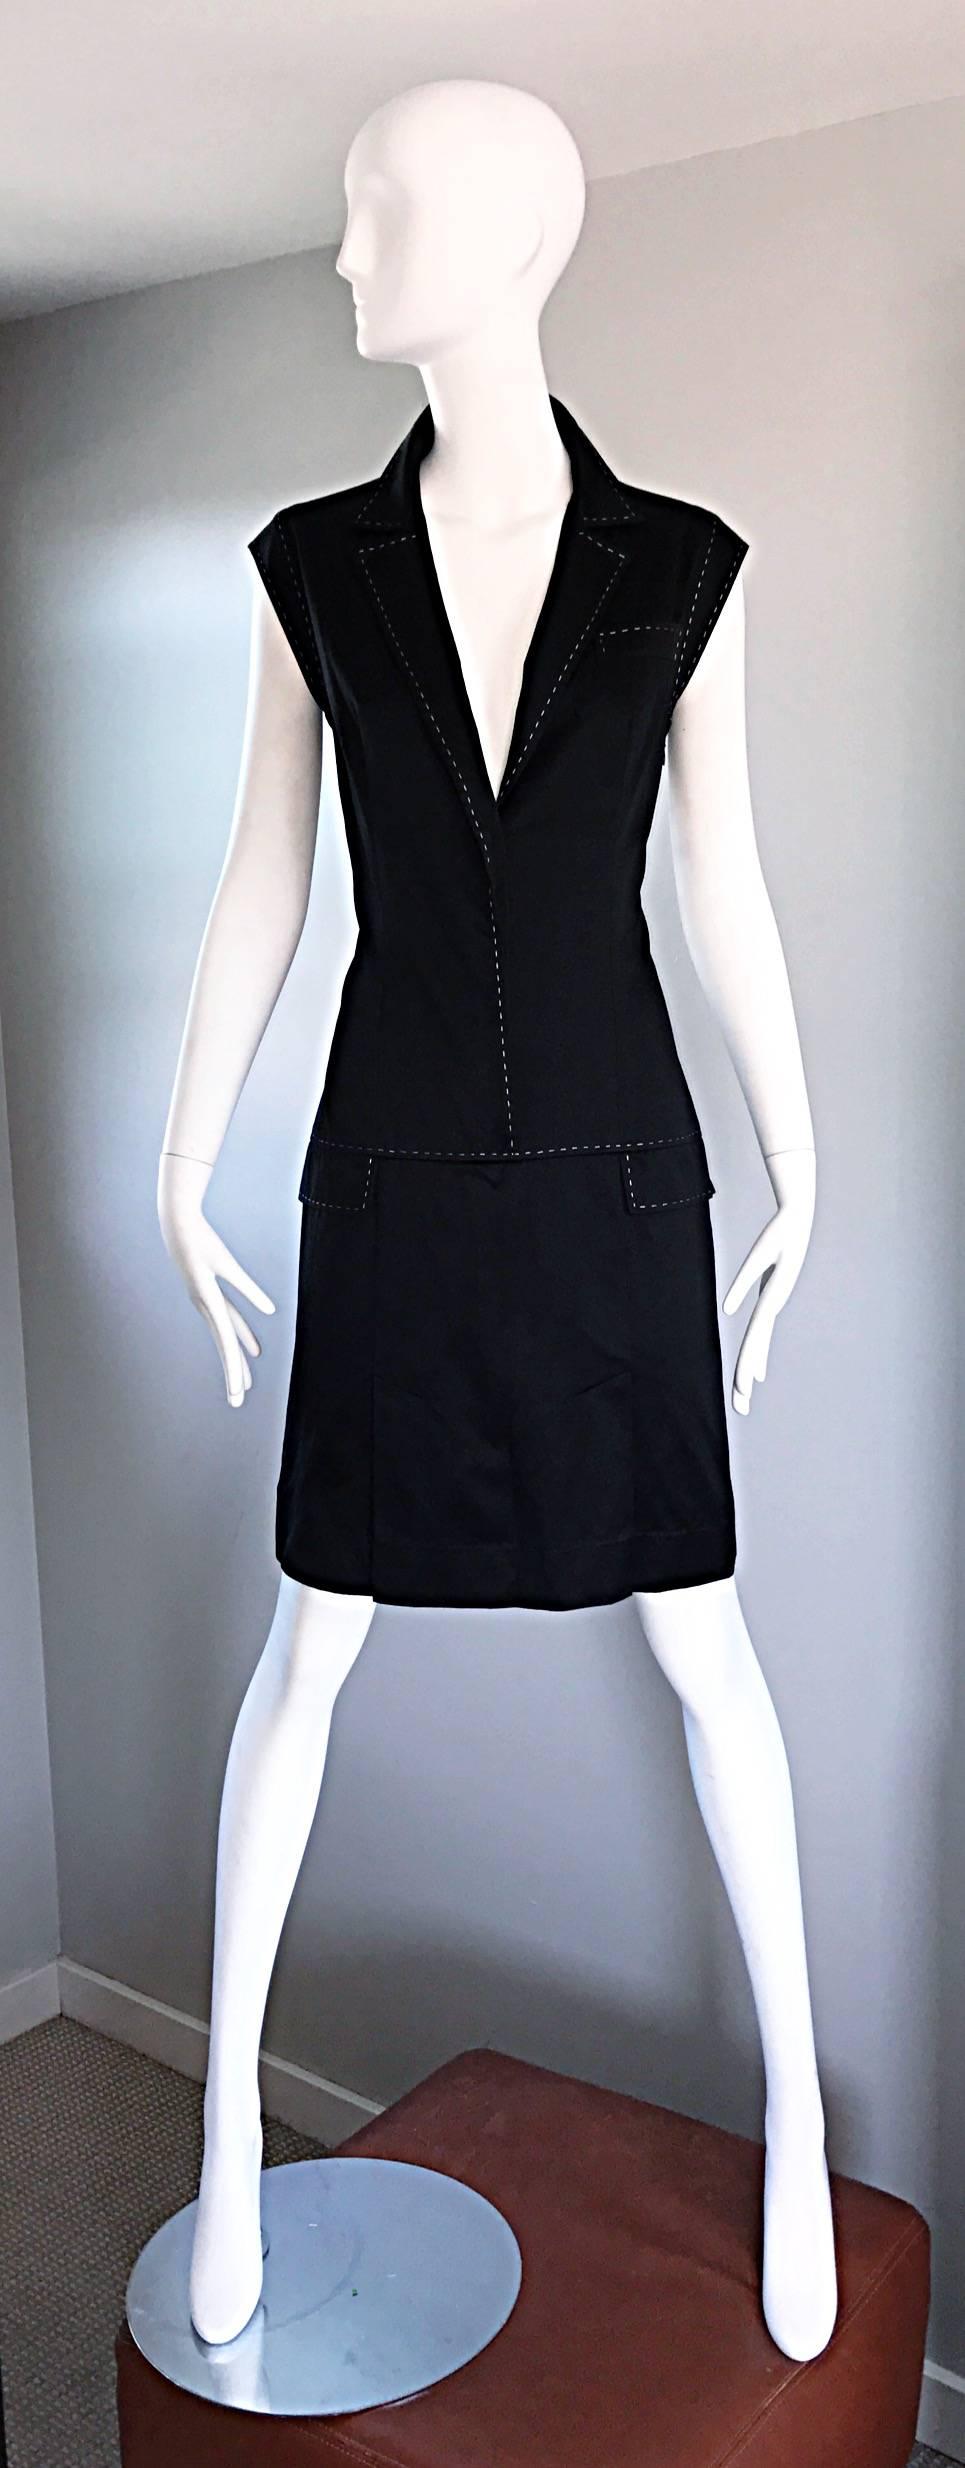 Sexy, yet classic vintage GIVENCHY by ALEXANDER MCQUEEN black and white cotton shift shirt dress! Features a deep v-neck that reveals just the right amount of cleavage. Hand-sewn white stitching throughout. Collar looks great popped up (as